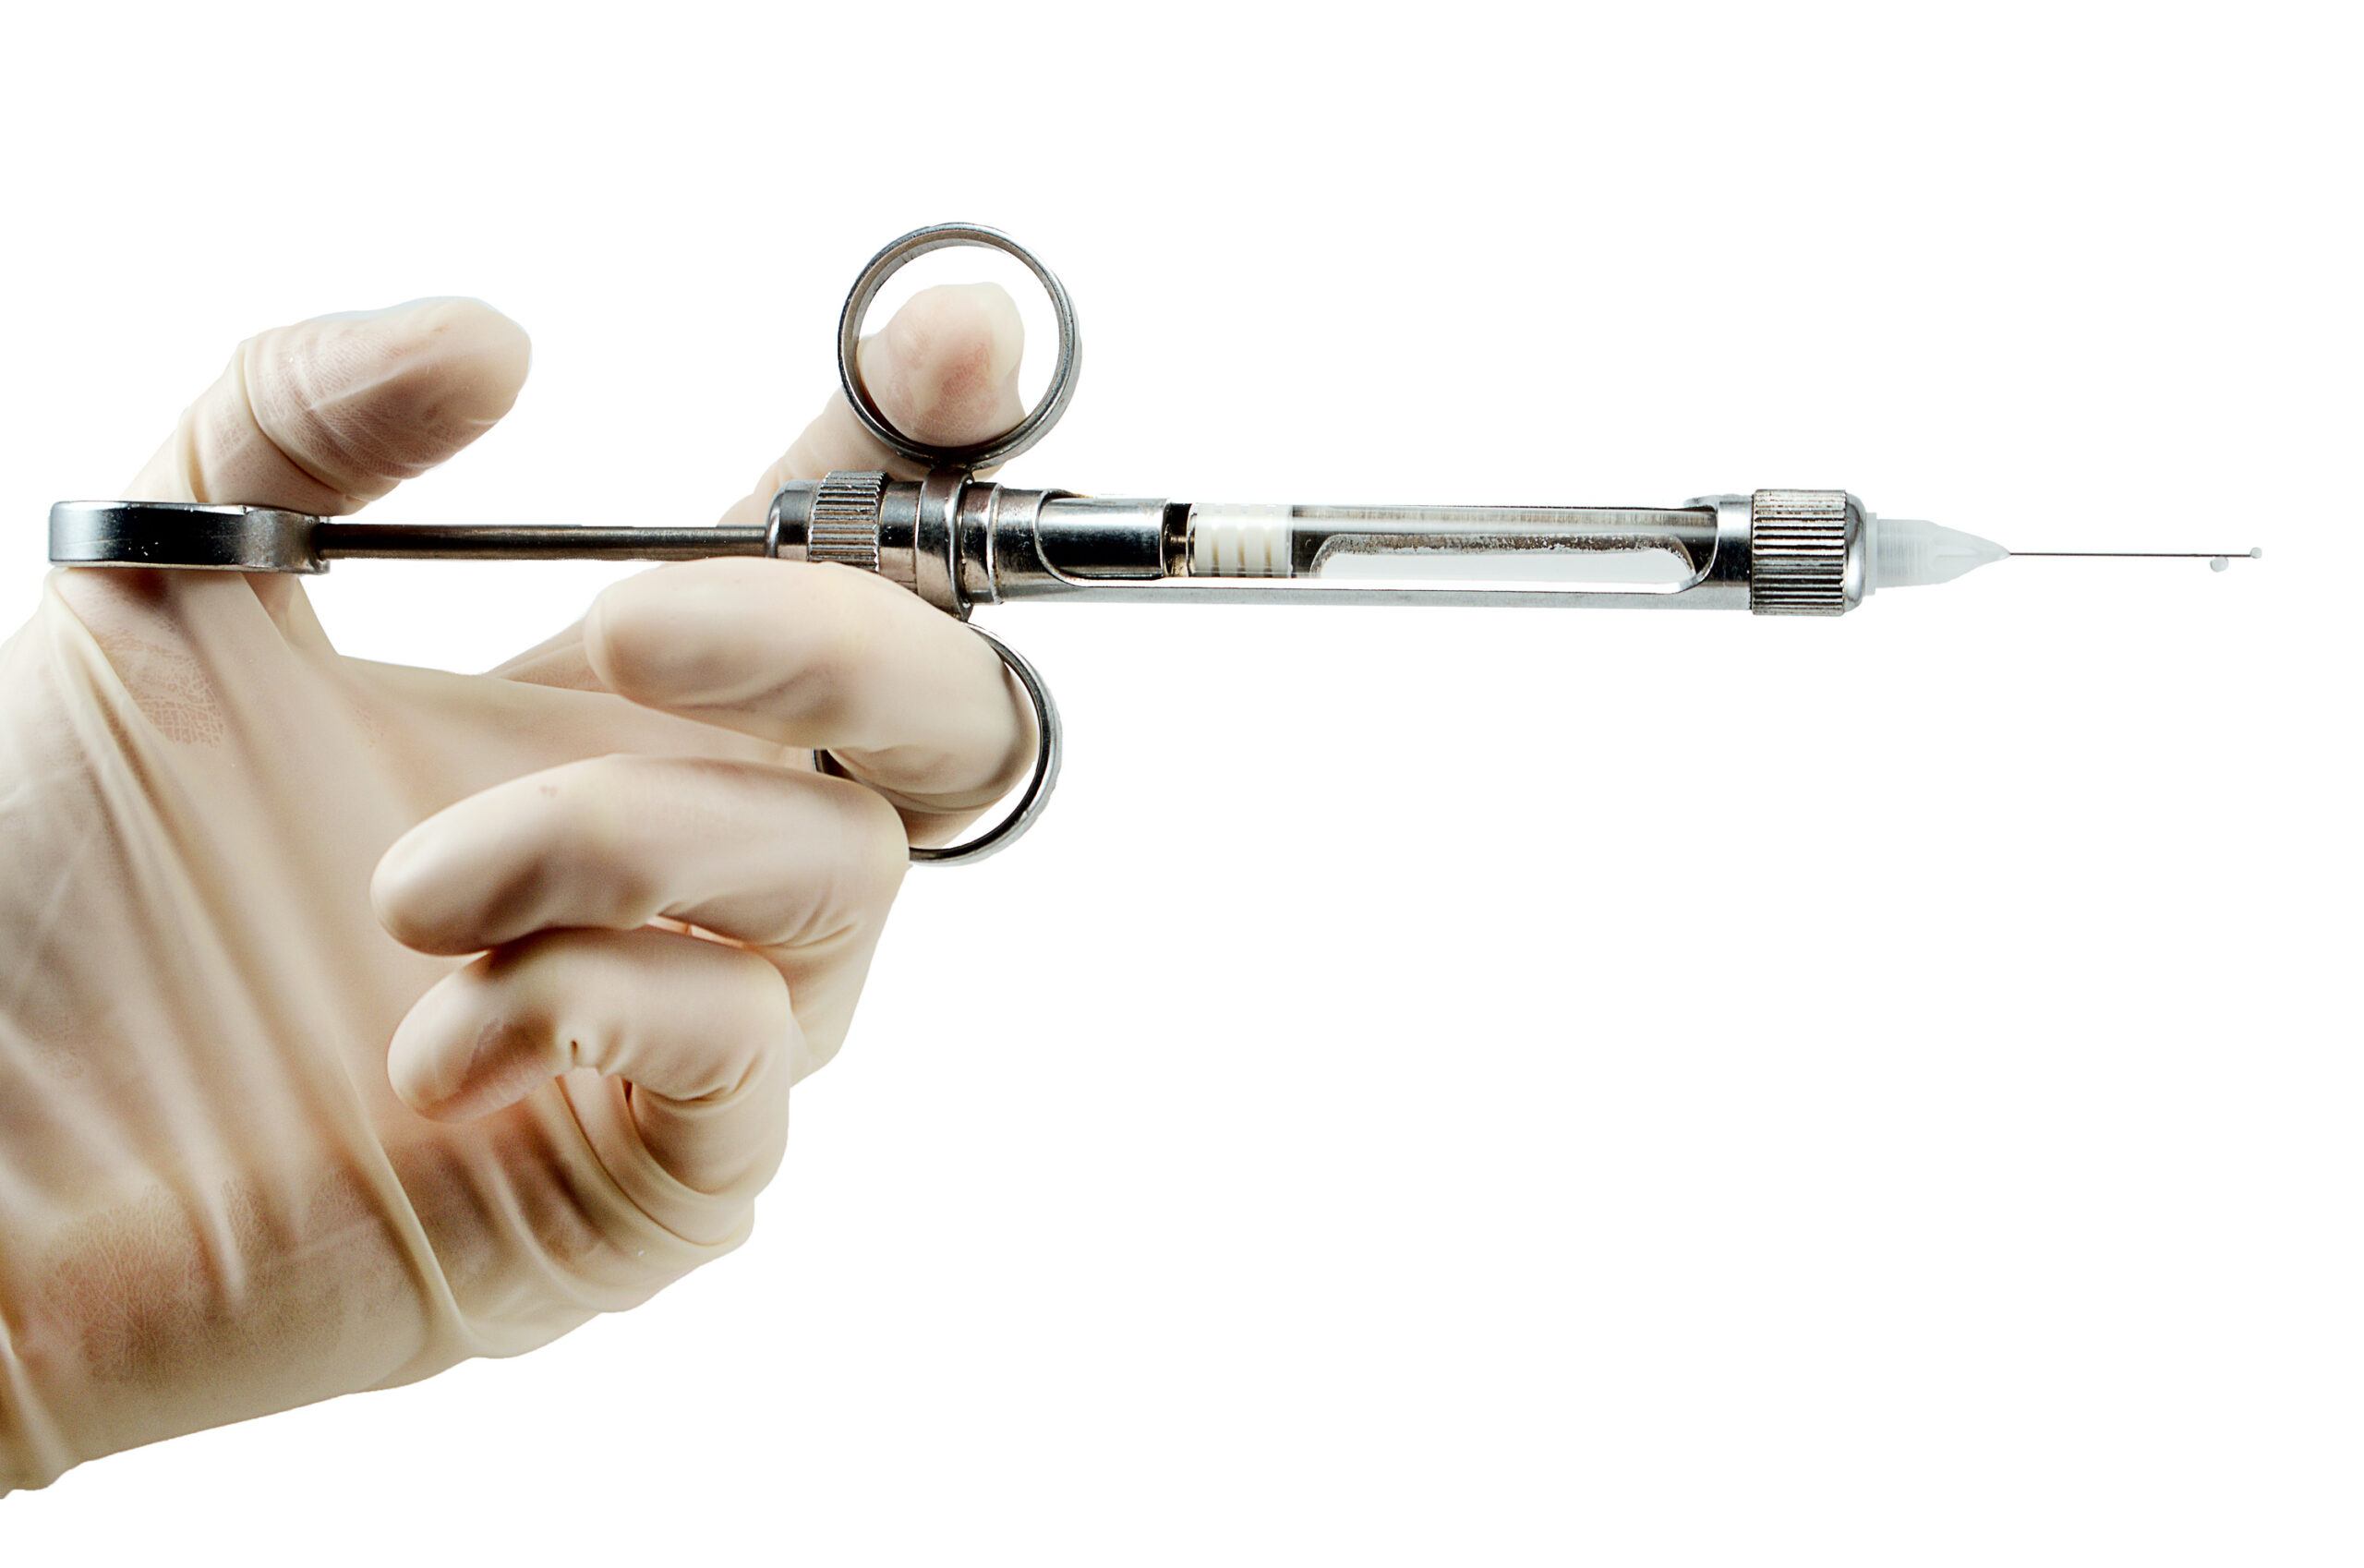 dentist’s hand with carpool syringe for local anesthesia on white background isolated